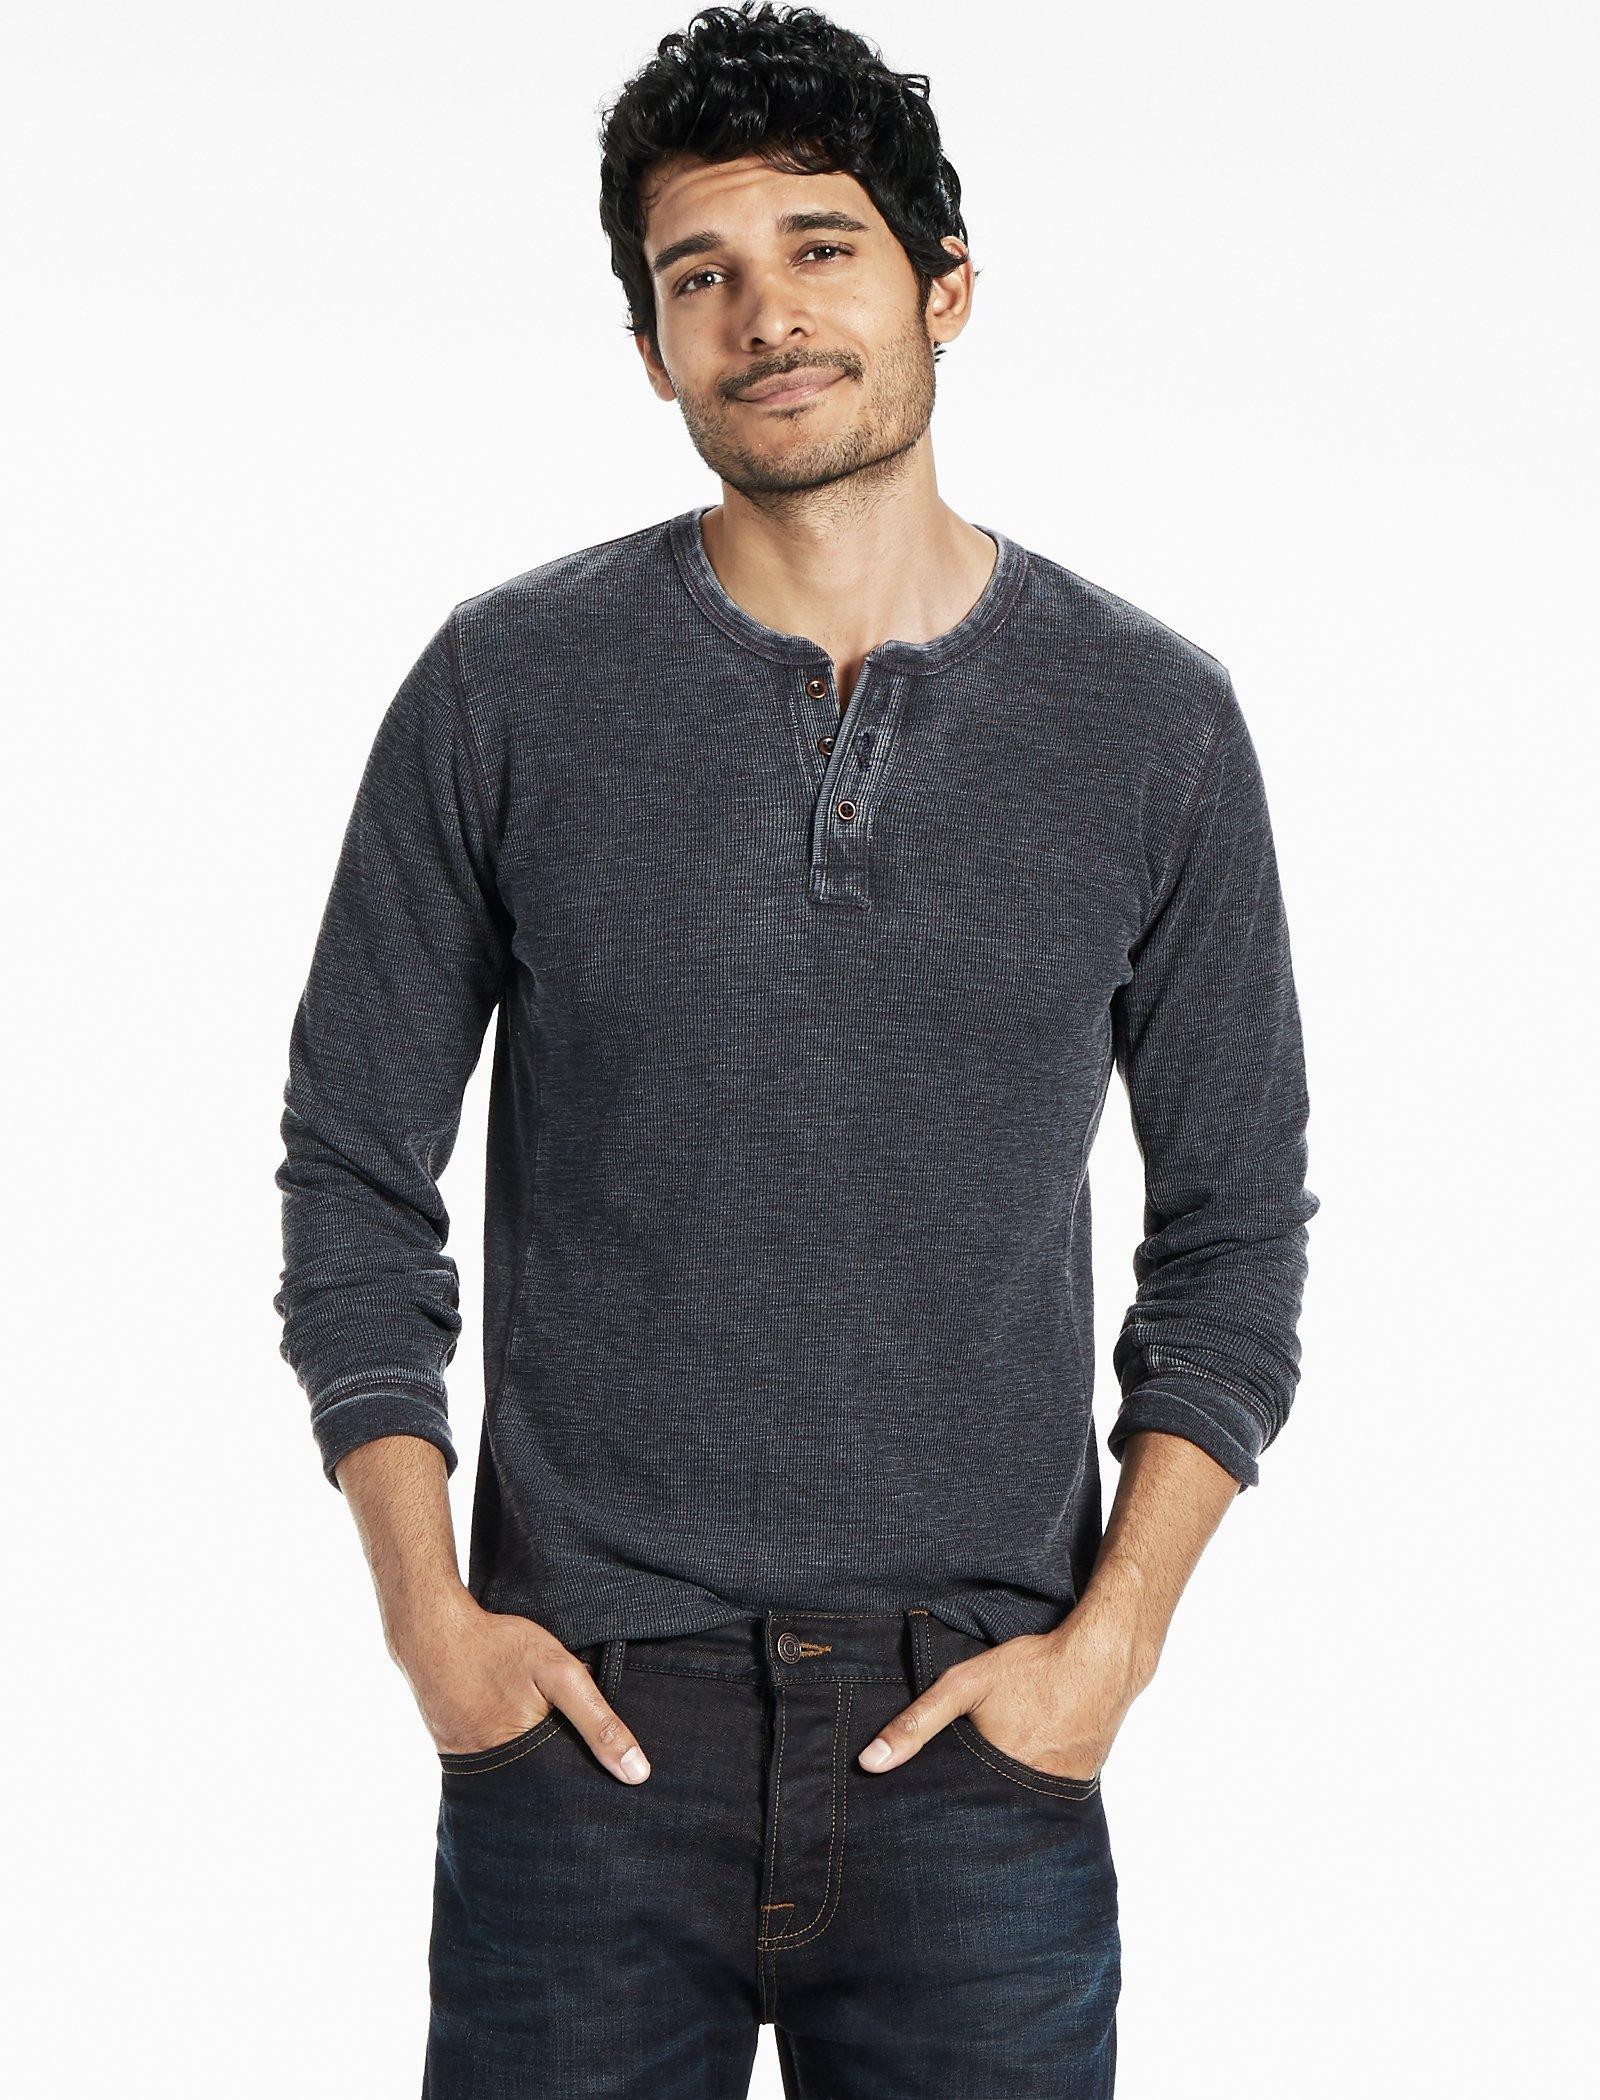 VENICE BURNOUT THERMAL HENLEY | Lucky Brand